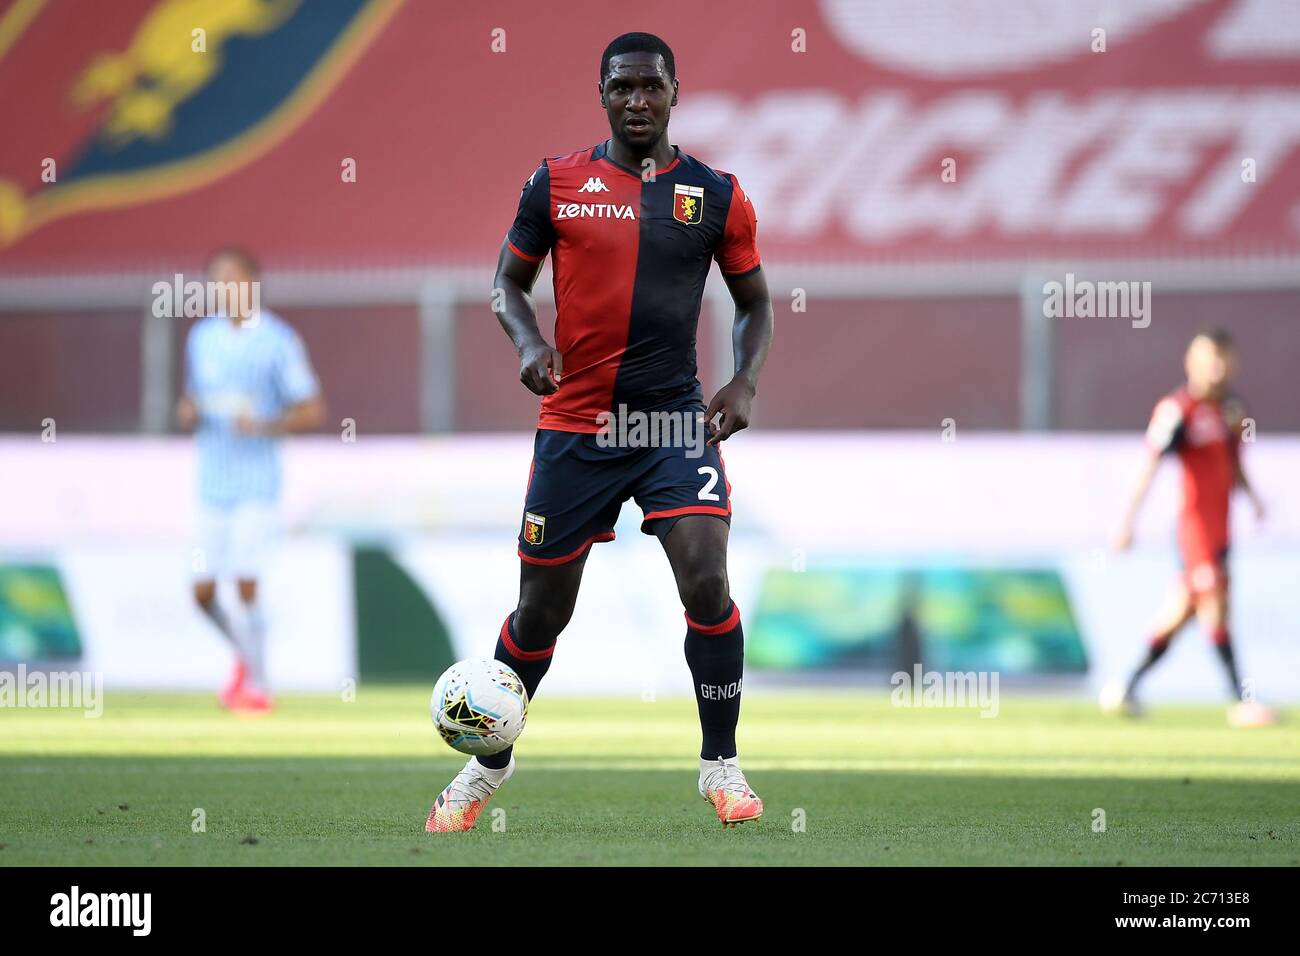 Genoa, Italy - 12 July, 2020: Cristian Zapata of Genoa CFC in action during the Serie A football match between Genoa CFC and SPAL. Genoa CFC won 2-0 over SPAL. Credit: Nicolò Campo/Alamy Live News Stock Photo